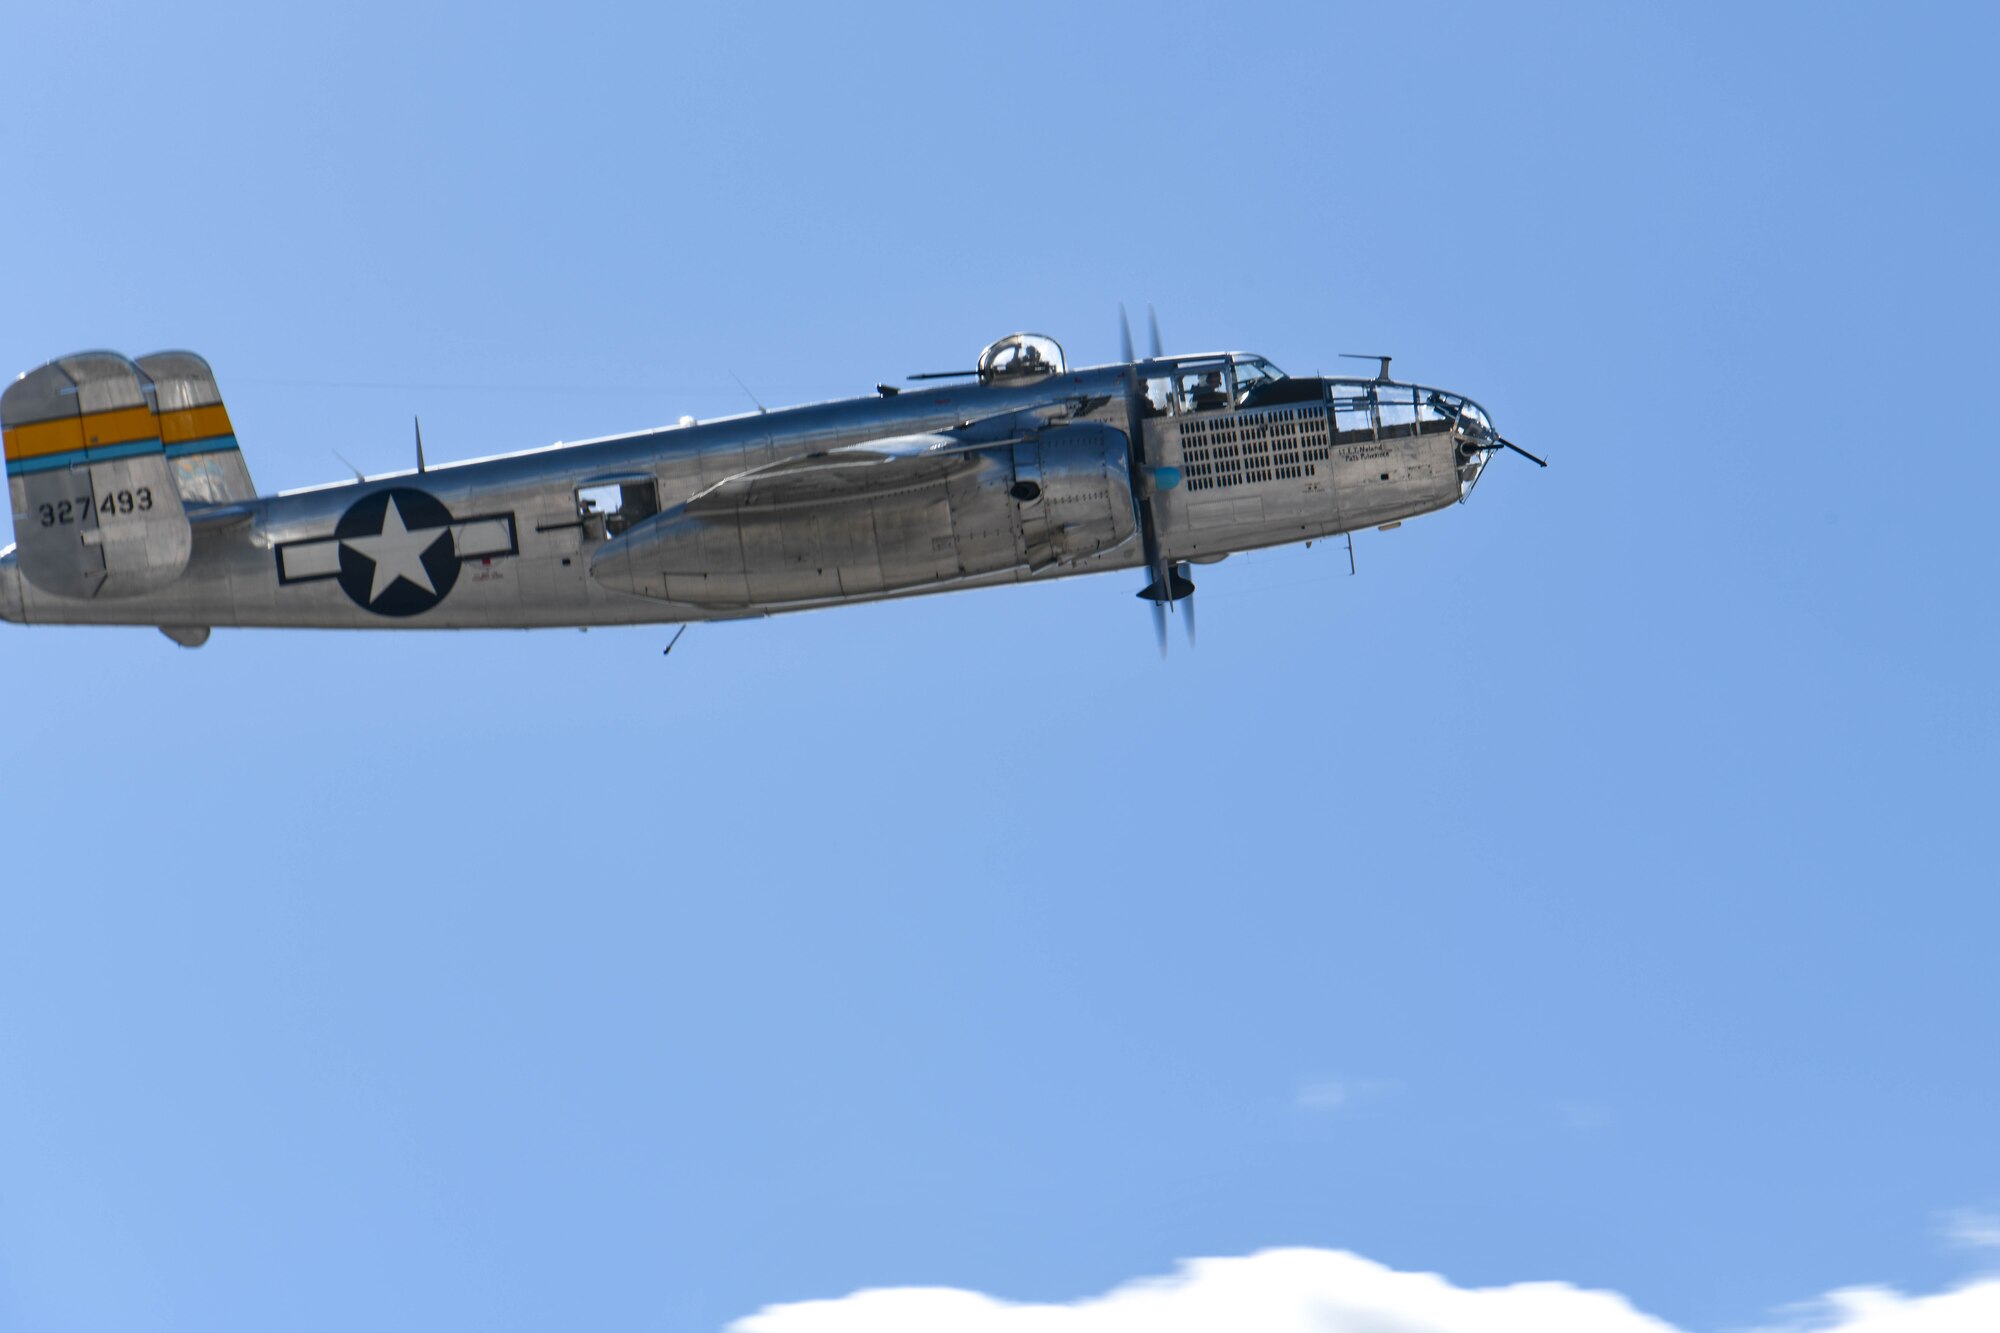 A B-25 Mitchell takes off from the flight line at Ellsworth Air Force Base, S.D., April 18, 2019. The B-25 was flown April 18, 1942, during the Doolittle Raid – a World War II operation to bomb Japan. The mission was the United States’ response to the attack on Pearl Harbor in Honolulu on Dec. 7, 1941. (U.S. Air Force photo by Airman 1st Class Thomas Karol)